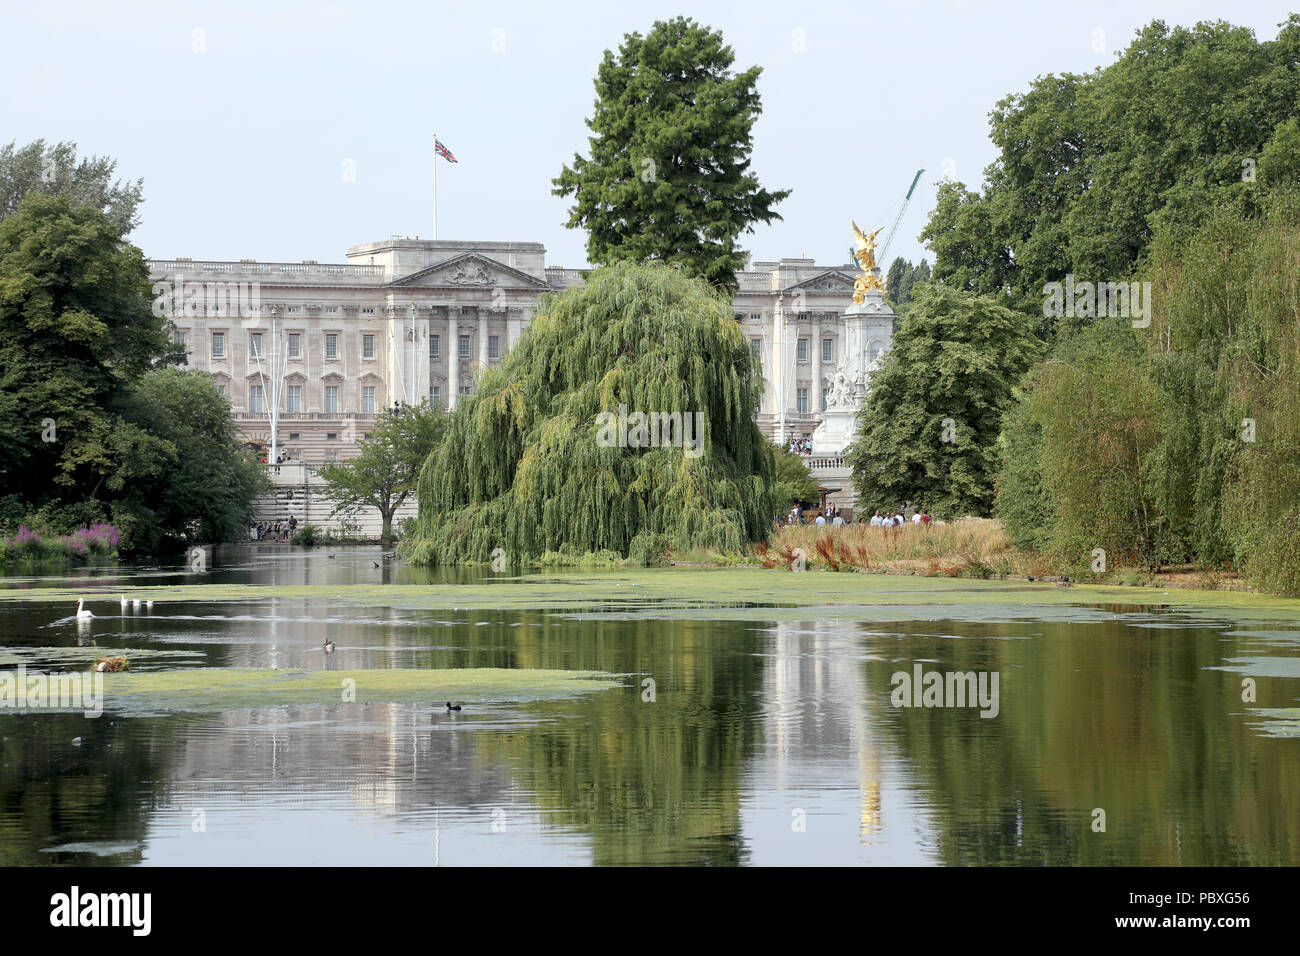 London / UK - July 26 2018: View of Buckingham Palace the home of the British monarch, through the trees of St James Park in central London Stock Photo